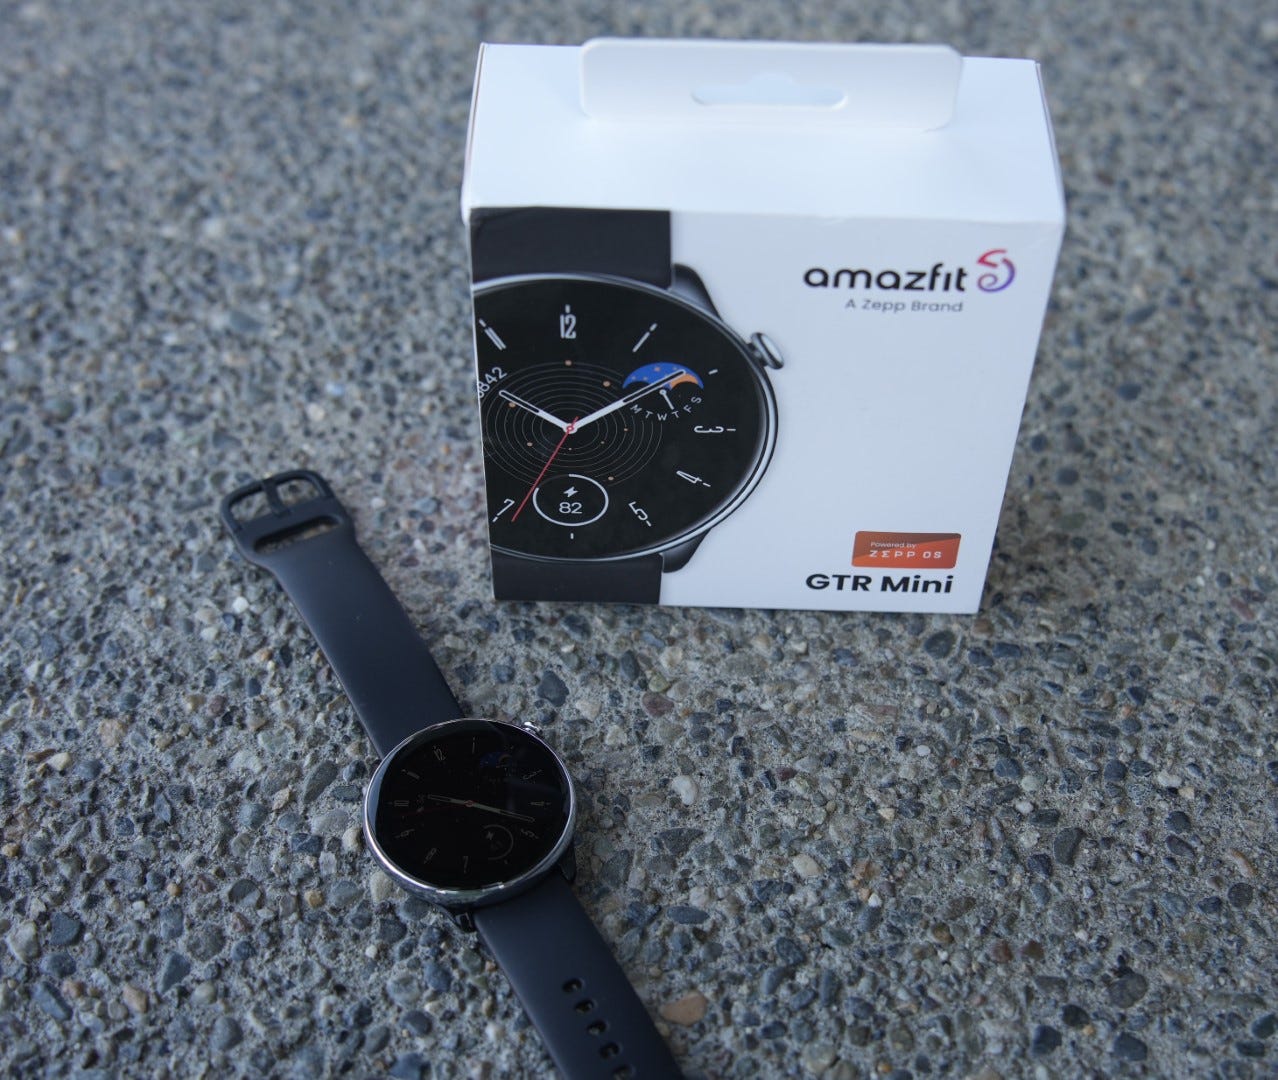 I used the Amazfit GTR Mini for 1 week and here is my experience